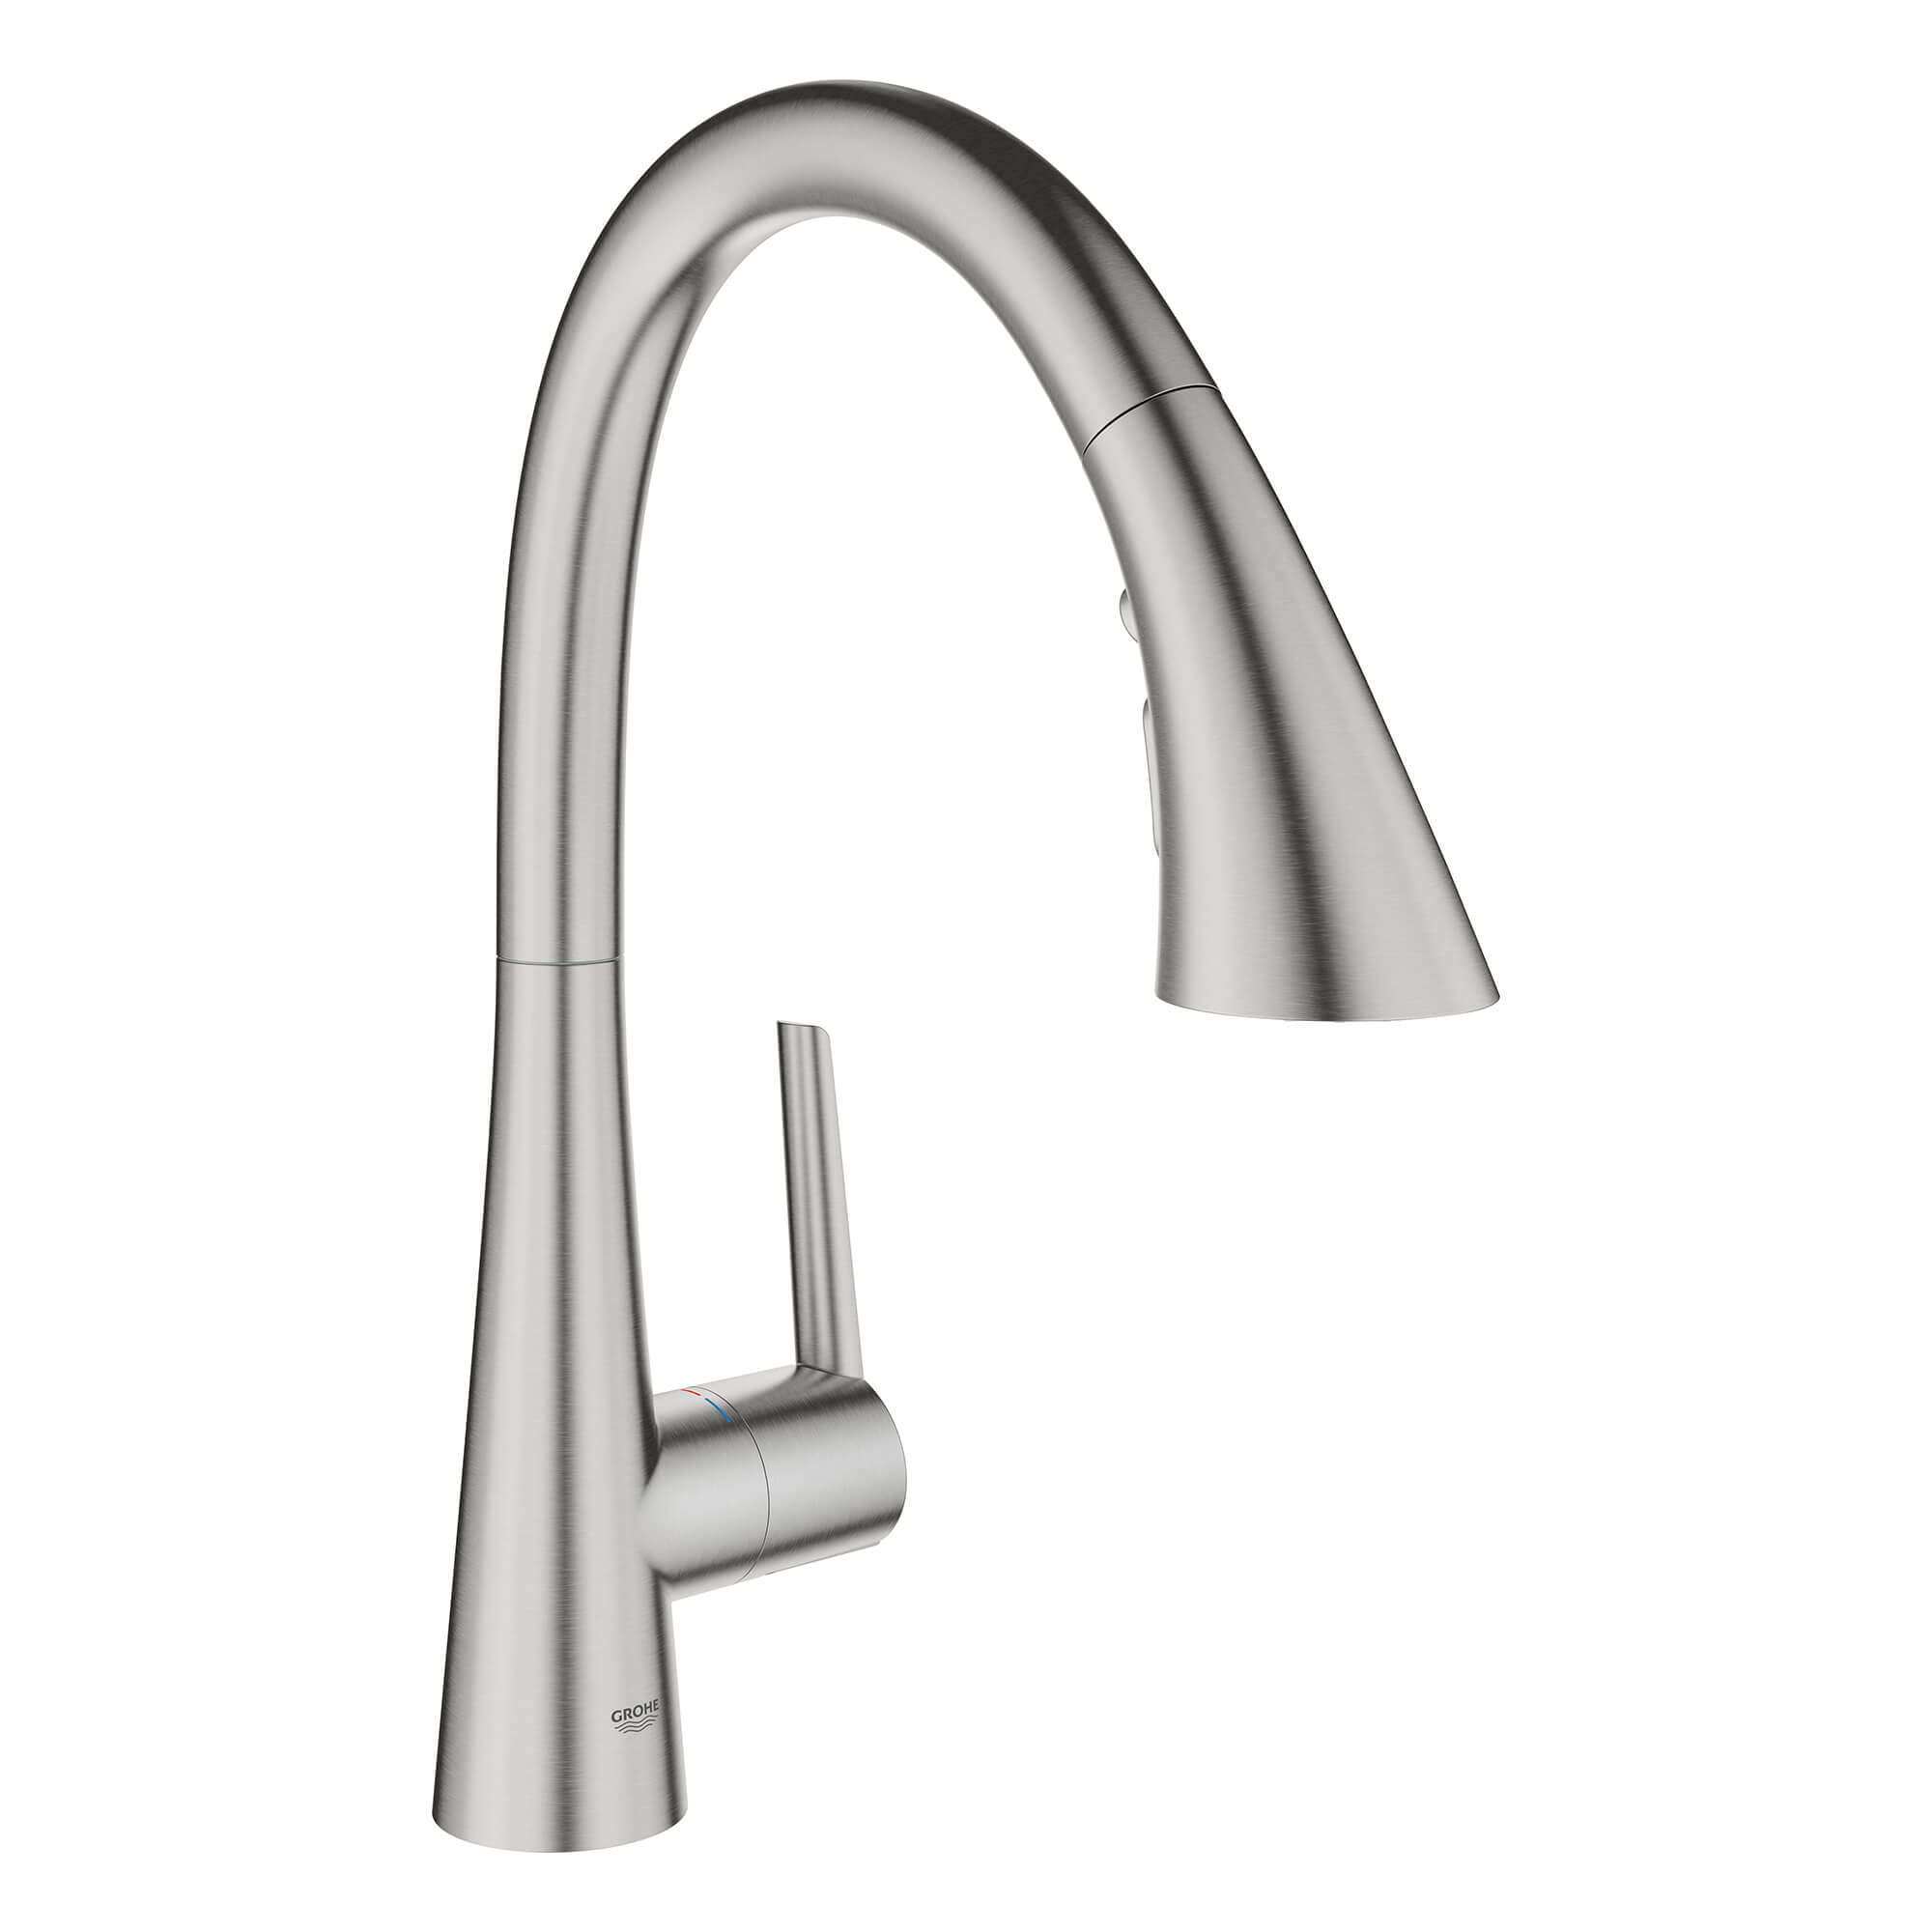 GROHE Zedra Pull-Down Faucet